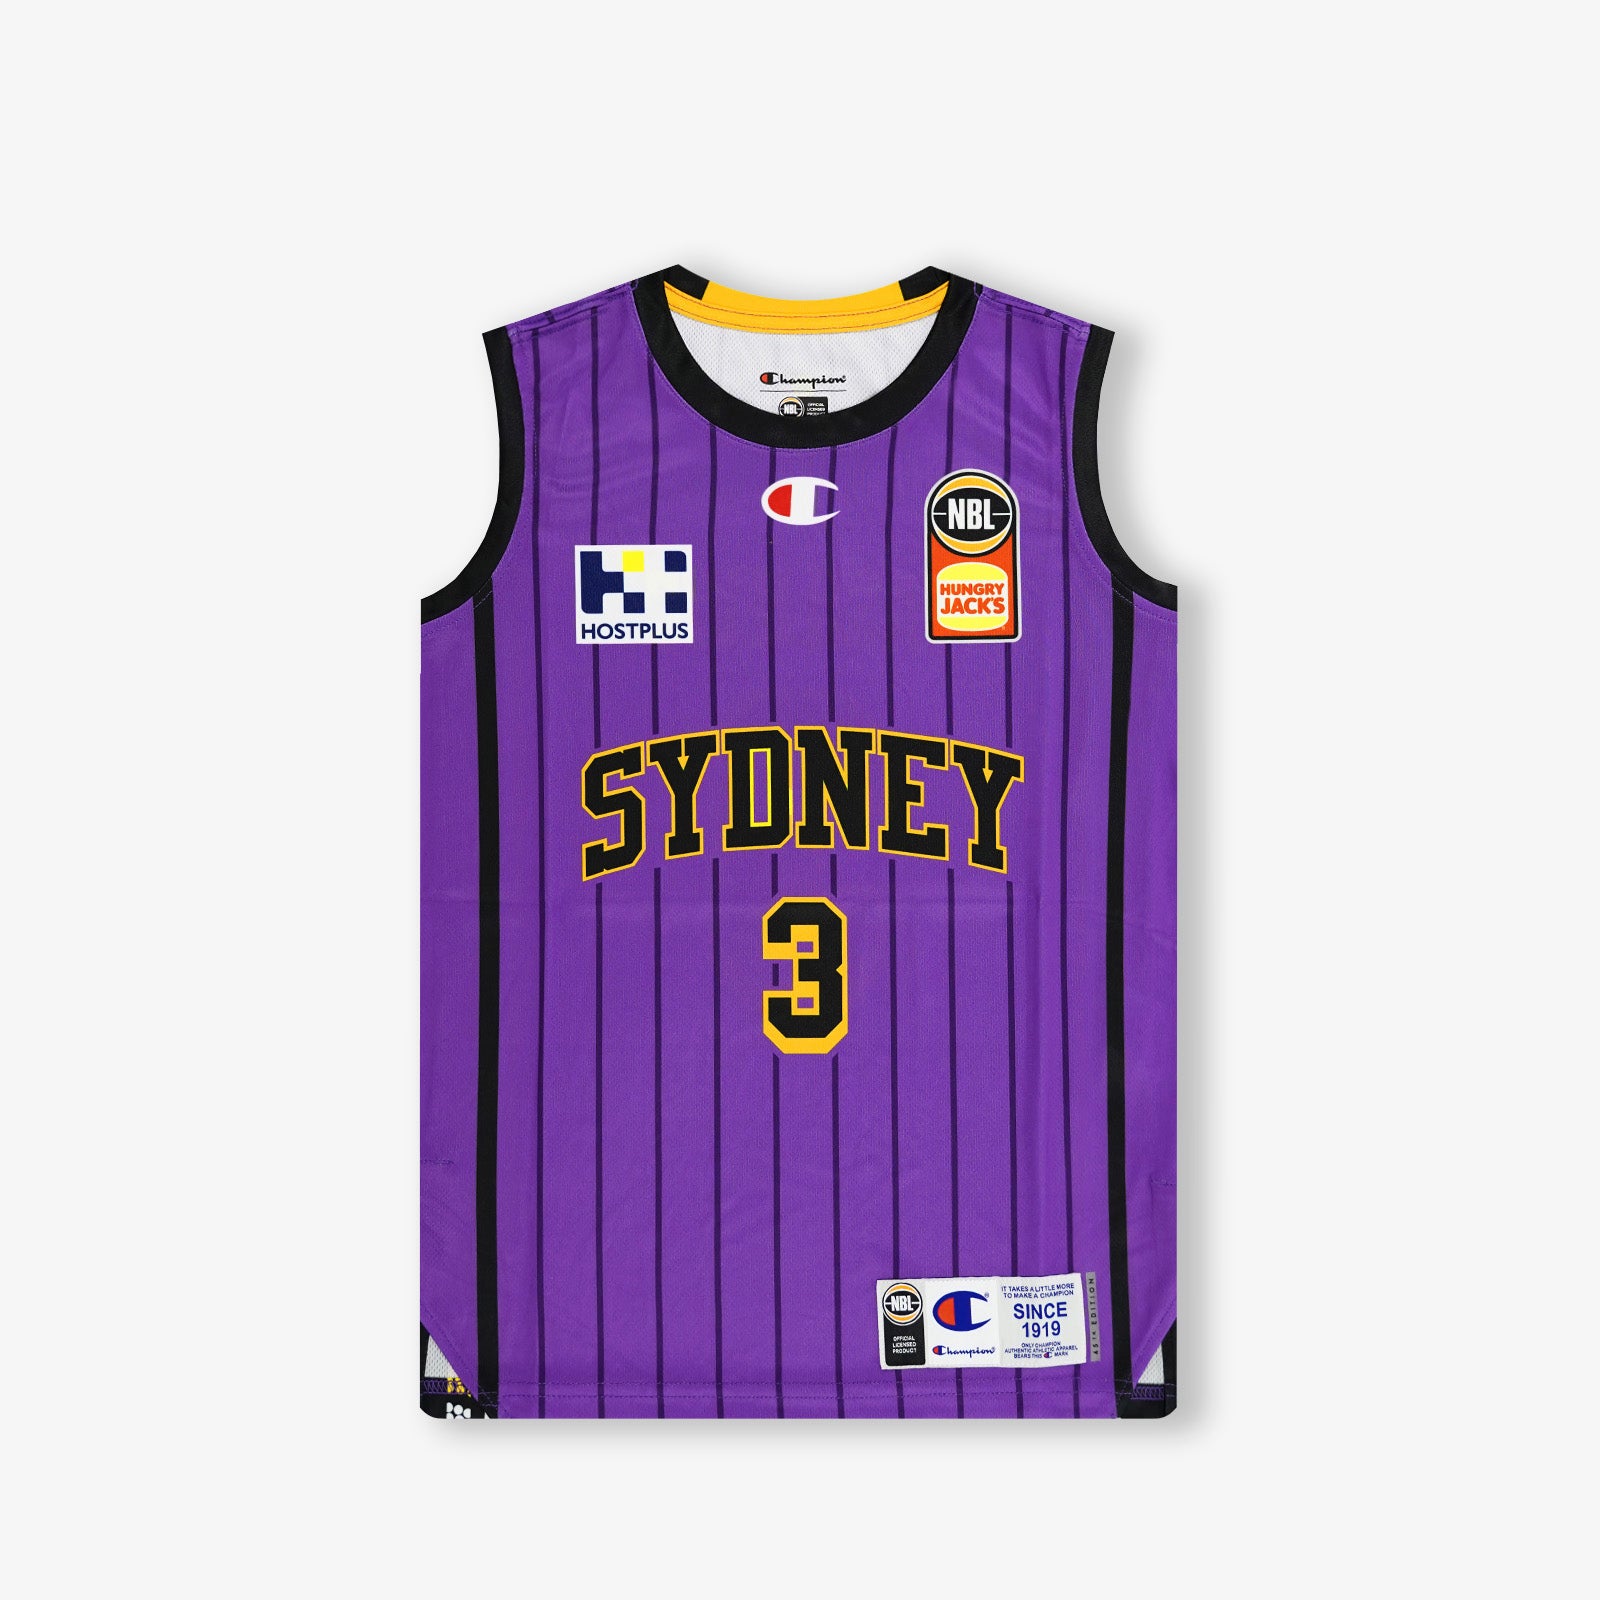 The story behind the Sydney Kings Indigenous jersey